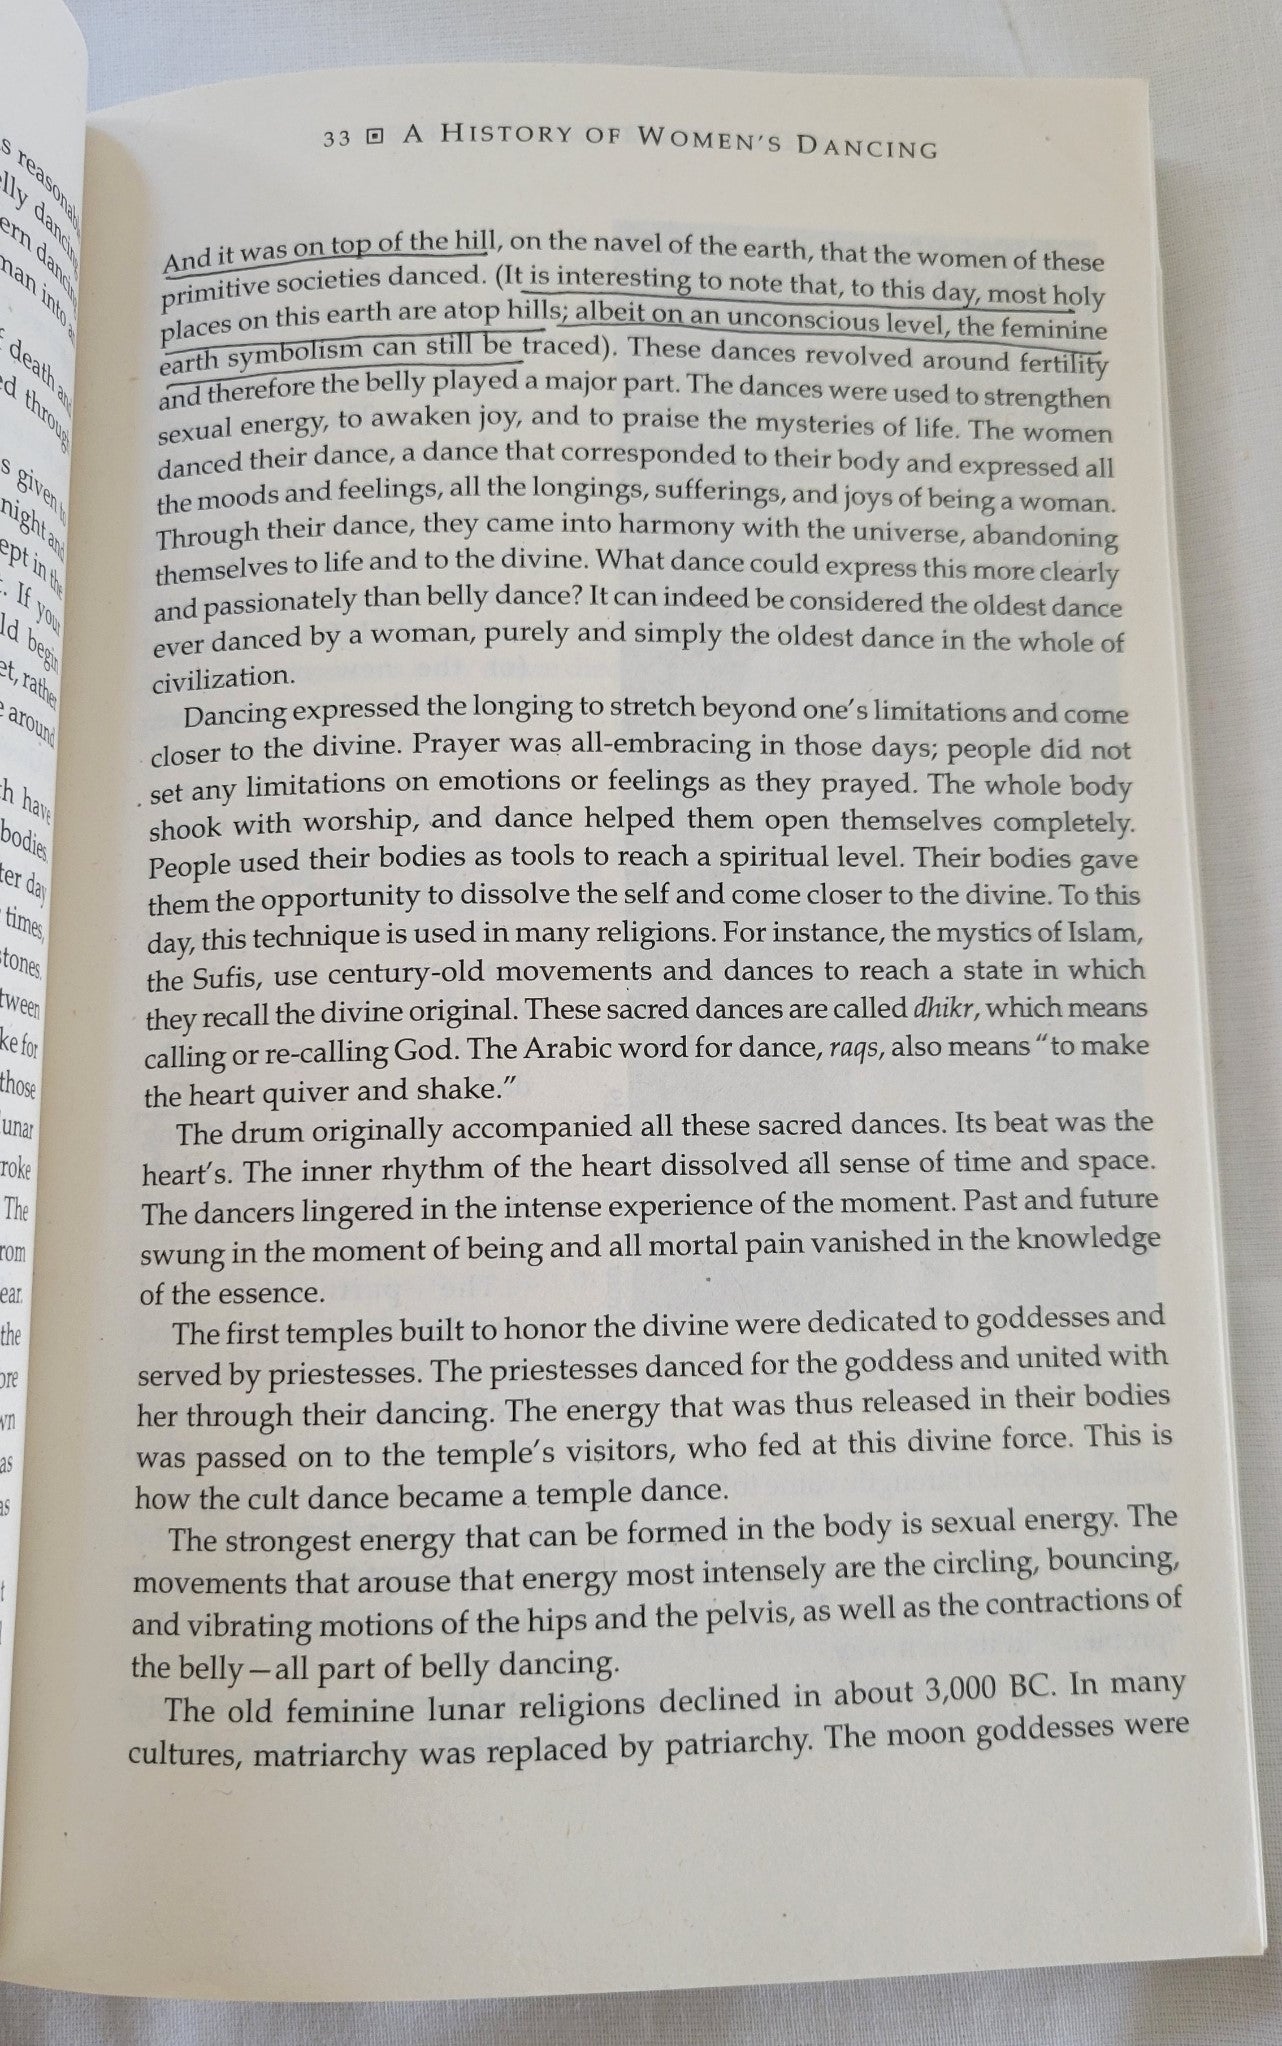 Used book for sale “Grandmother's Secrets: The Ancient Rituals and Healing Power of Belly Dancing” written by Rosina-Fawzia Al-Rawi, translated by Monique Arav.  View of page 33